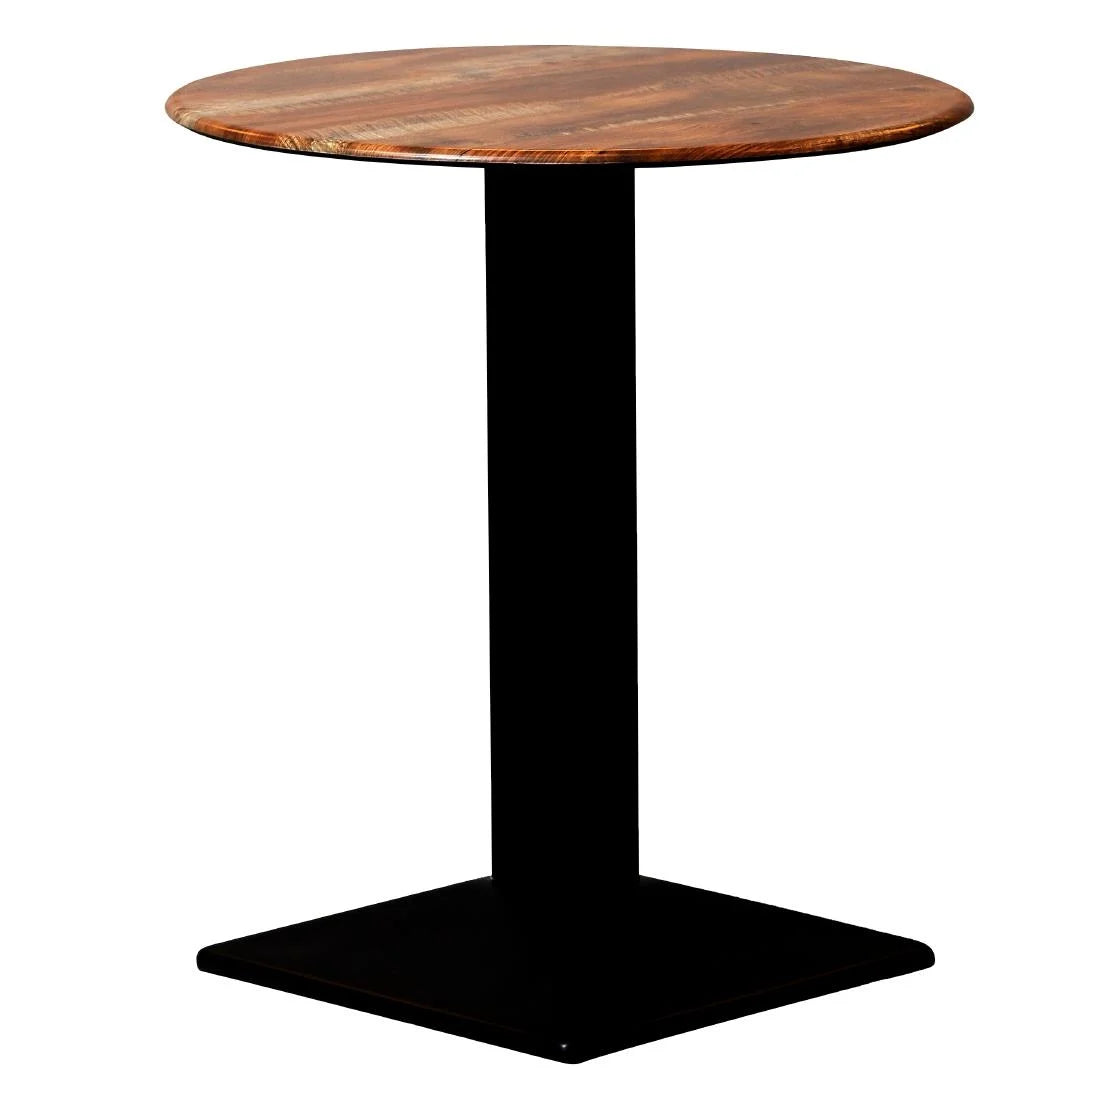 CZ820 Turin Metal Base Round Dining Table with Laminate Top Planked Oak 600mm JD Catering Equipment Solutions Ltd